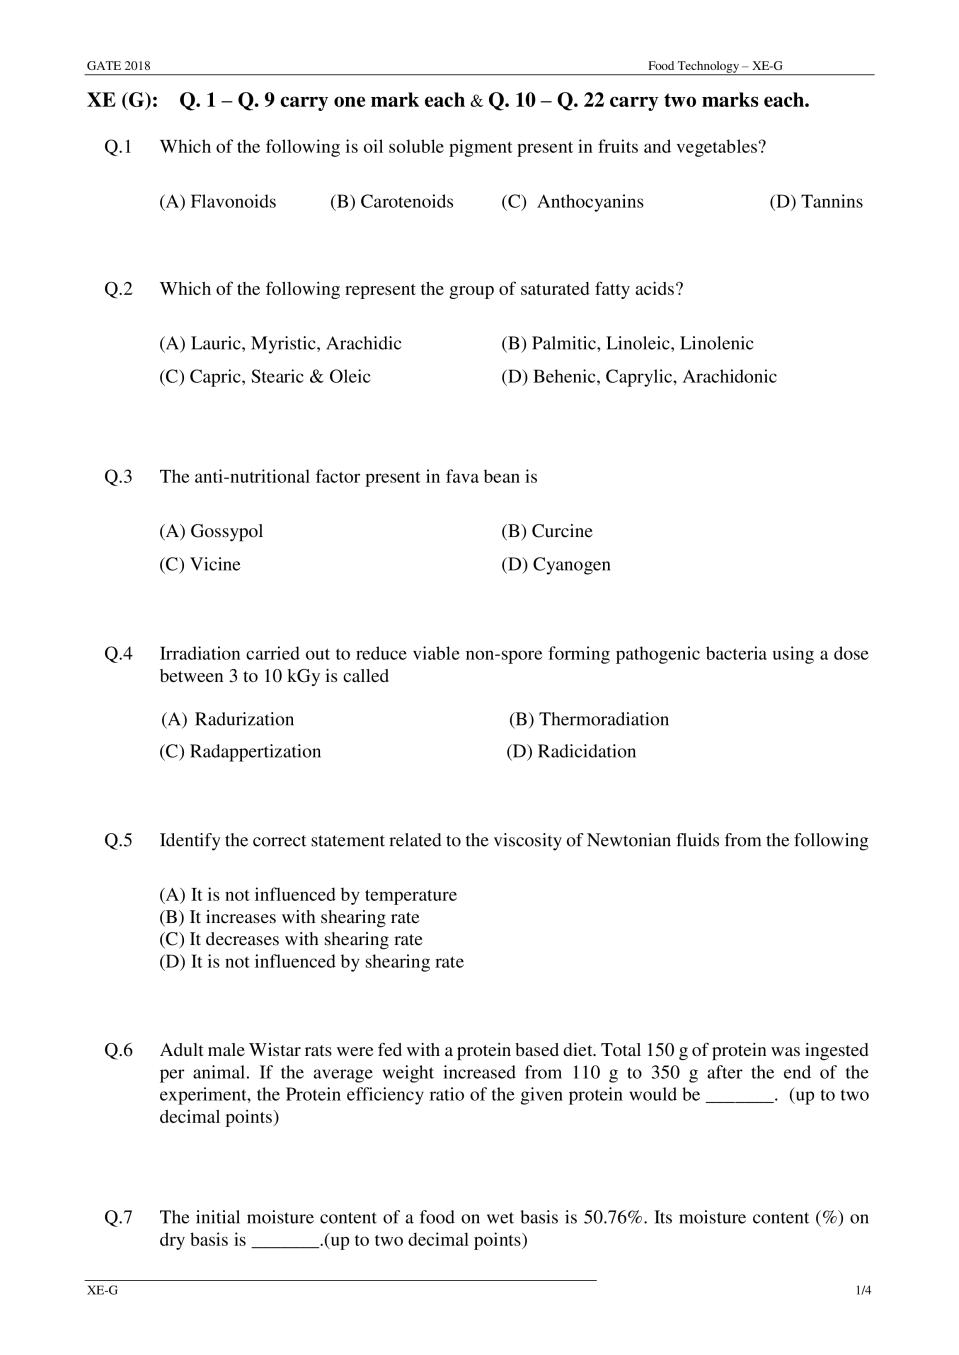 GATE 2018 Food Technology (FT- XE-G) Question Paper with Answer - Page 1